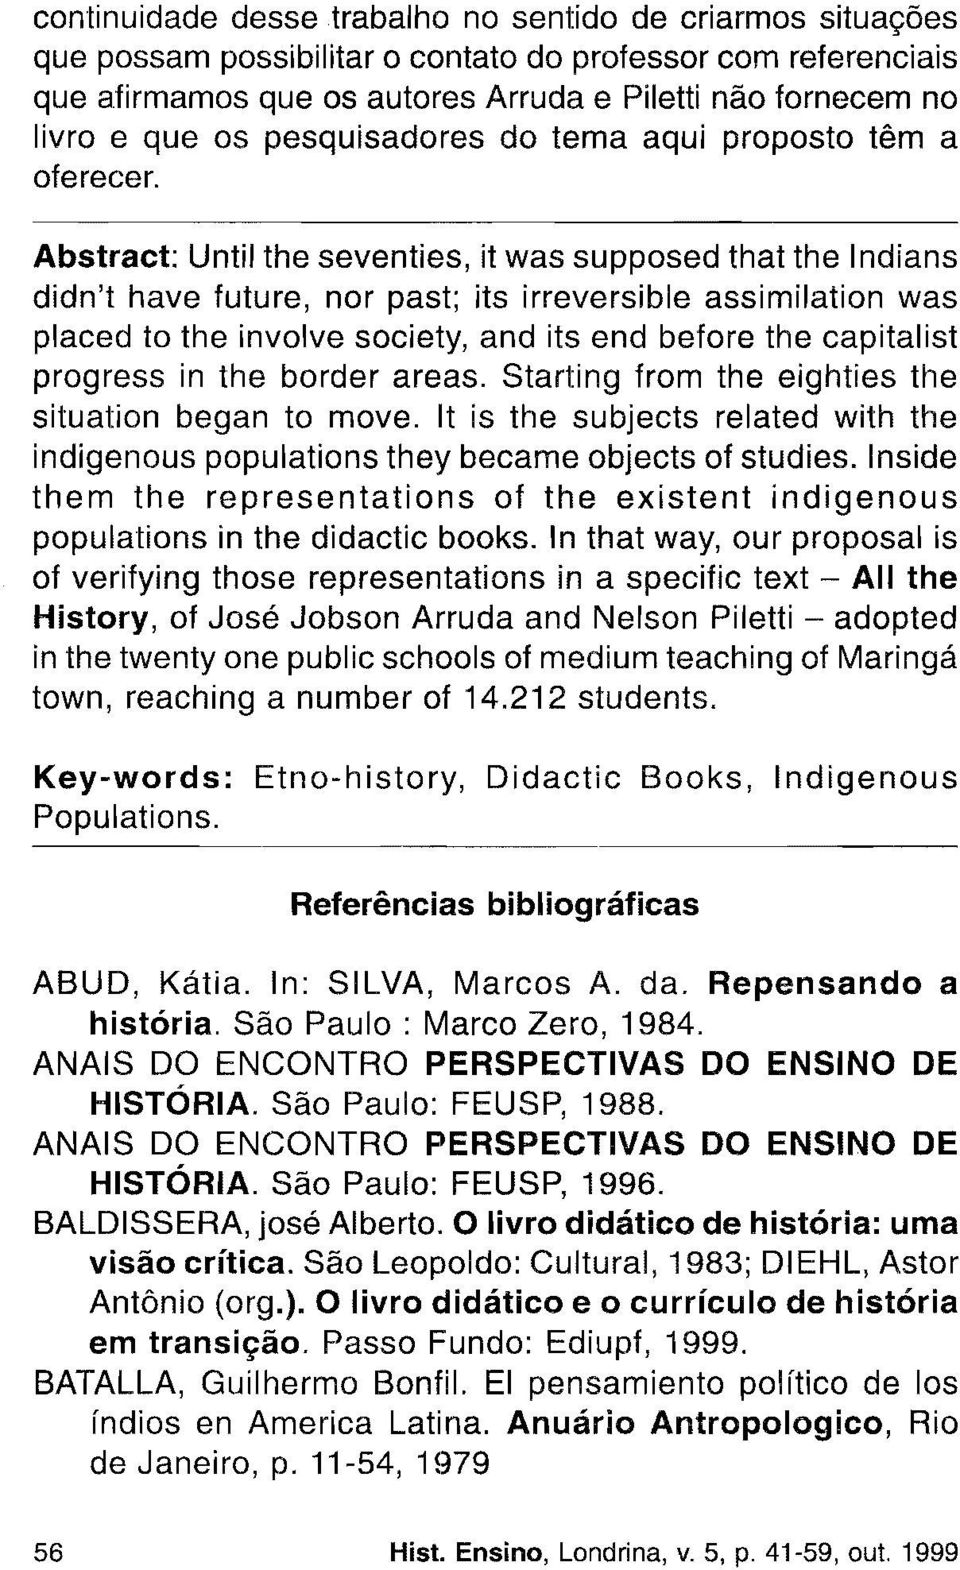 Abstract: Until the seventies, it was supposed that the Indians didn't have future, nor past; its irreversible assimilation was placed to the involve society, and its end before the capitalist